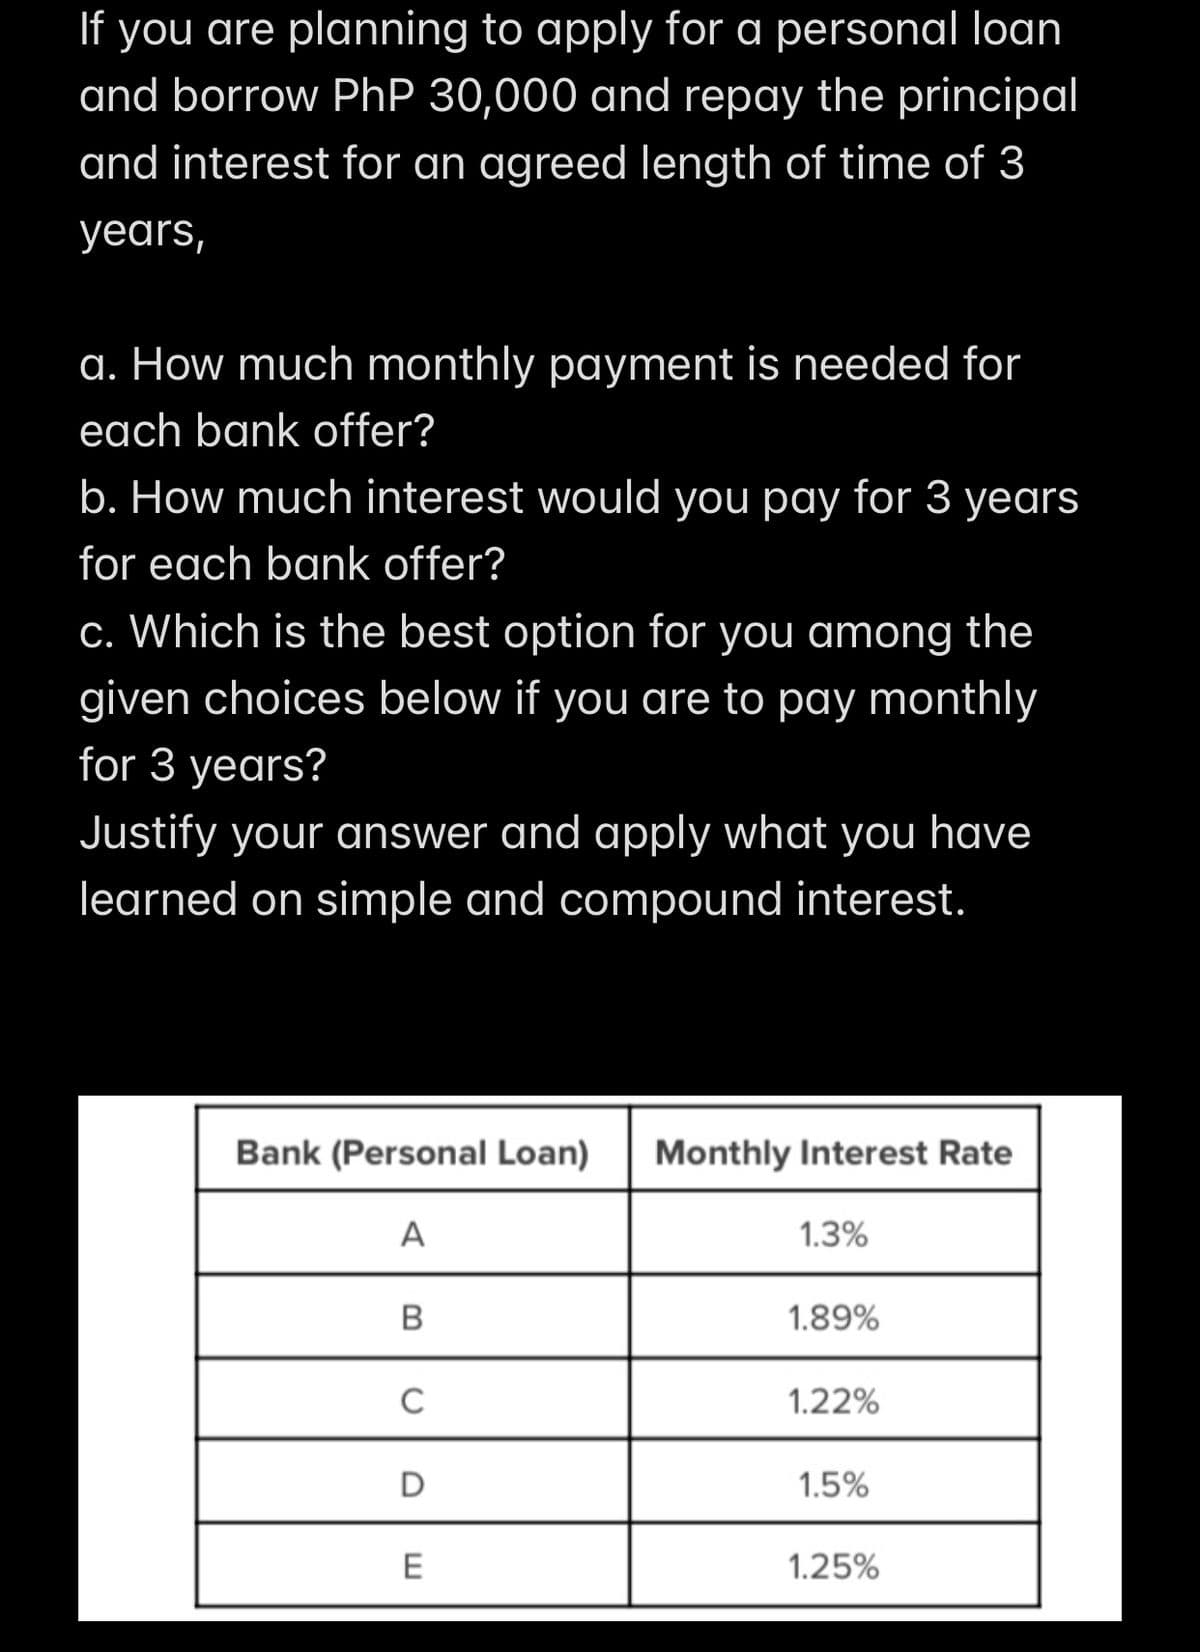 If you are planning to apply for a personal loan
and borrow PhP 30,000 and repay the principal
and interest for an agreed length of time of 3
yedrs,
a. How much monthly payment is needed for
each bank offer?
b. How much interest would you pay for 3 years
for each bank offer?
c. Which is the best option for you among the
given choices below if you are to pay monthly
for 3 years?
Justify your answer and apply what you have
learned on simple and compound interest.
Bank (Personal Loan)
Monthly Interest Rate
A
1.3%
B
1.89%
C
1.22%
D
1.5%
E
1.25%
